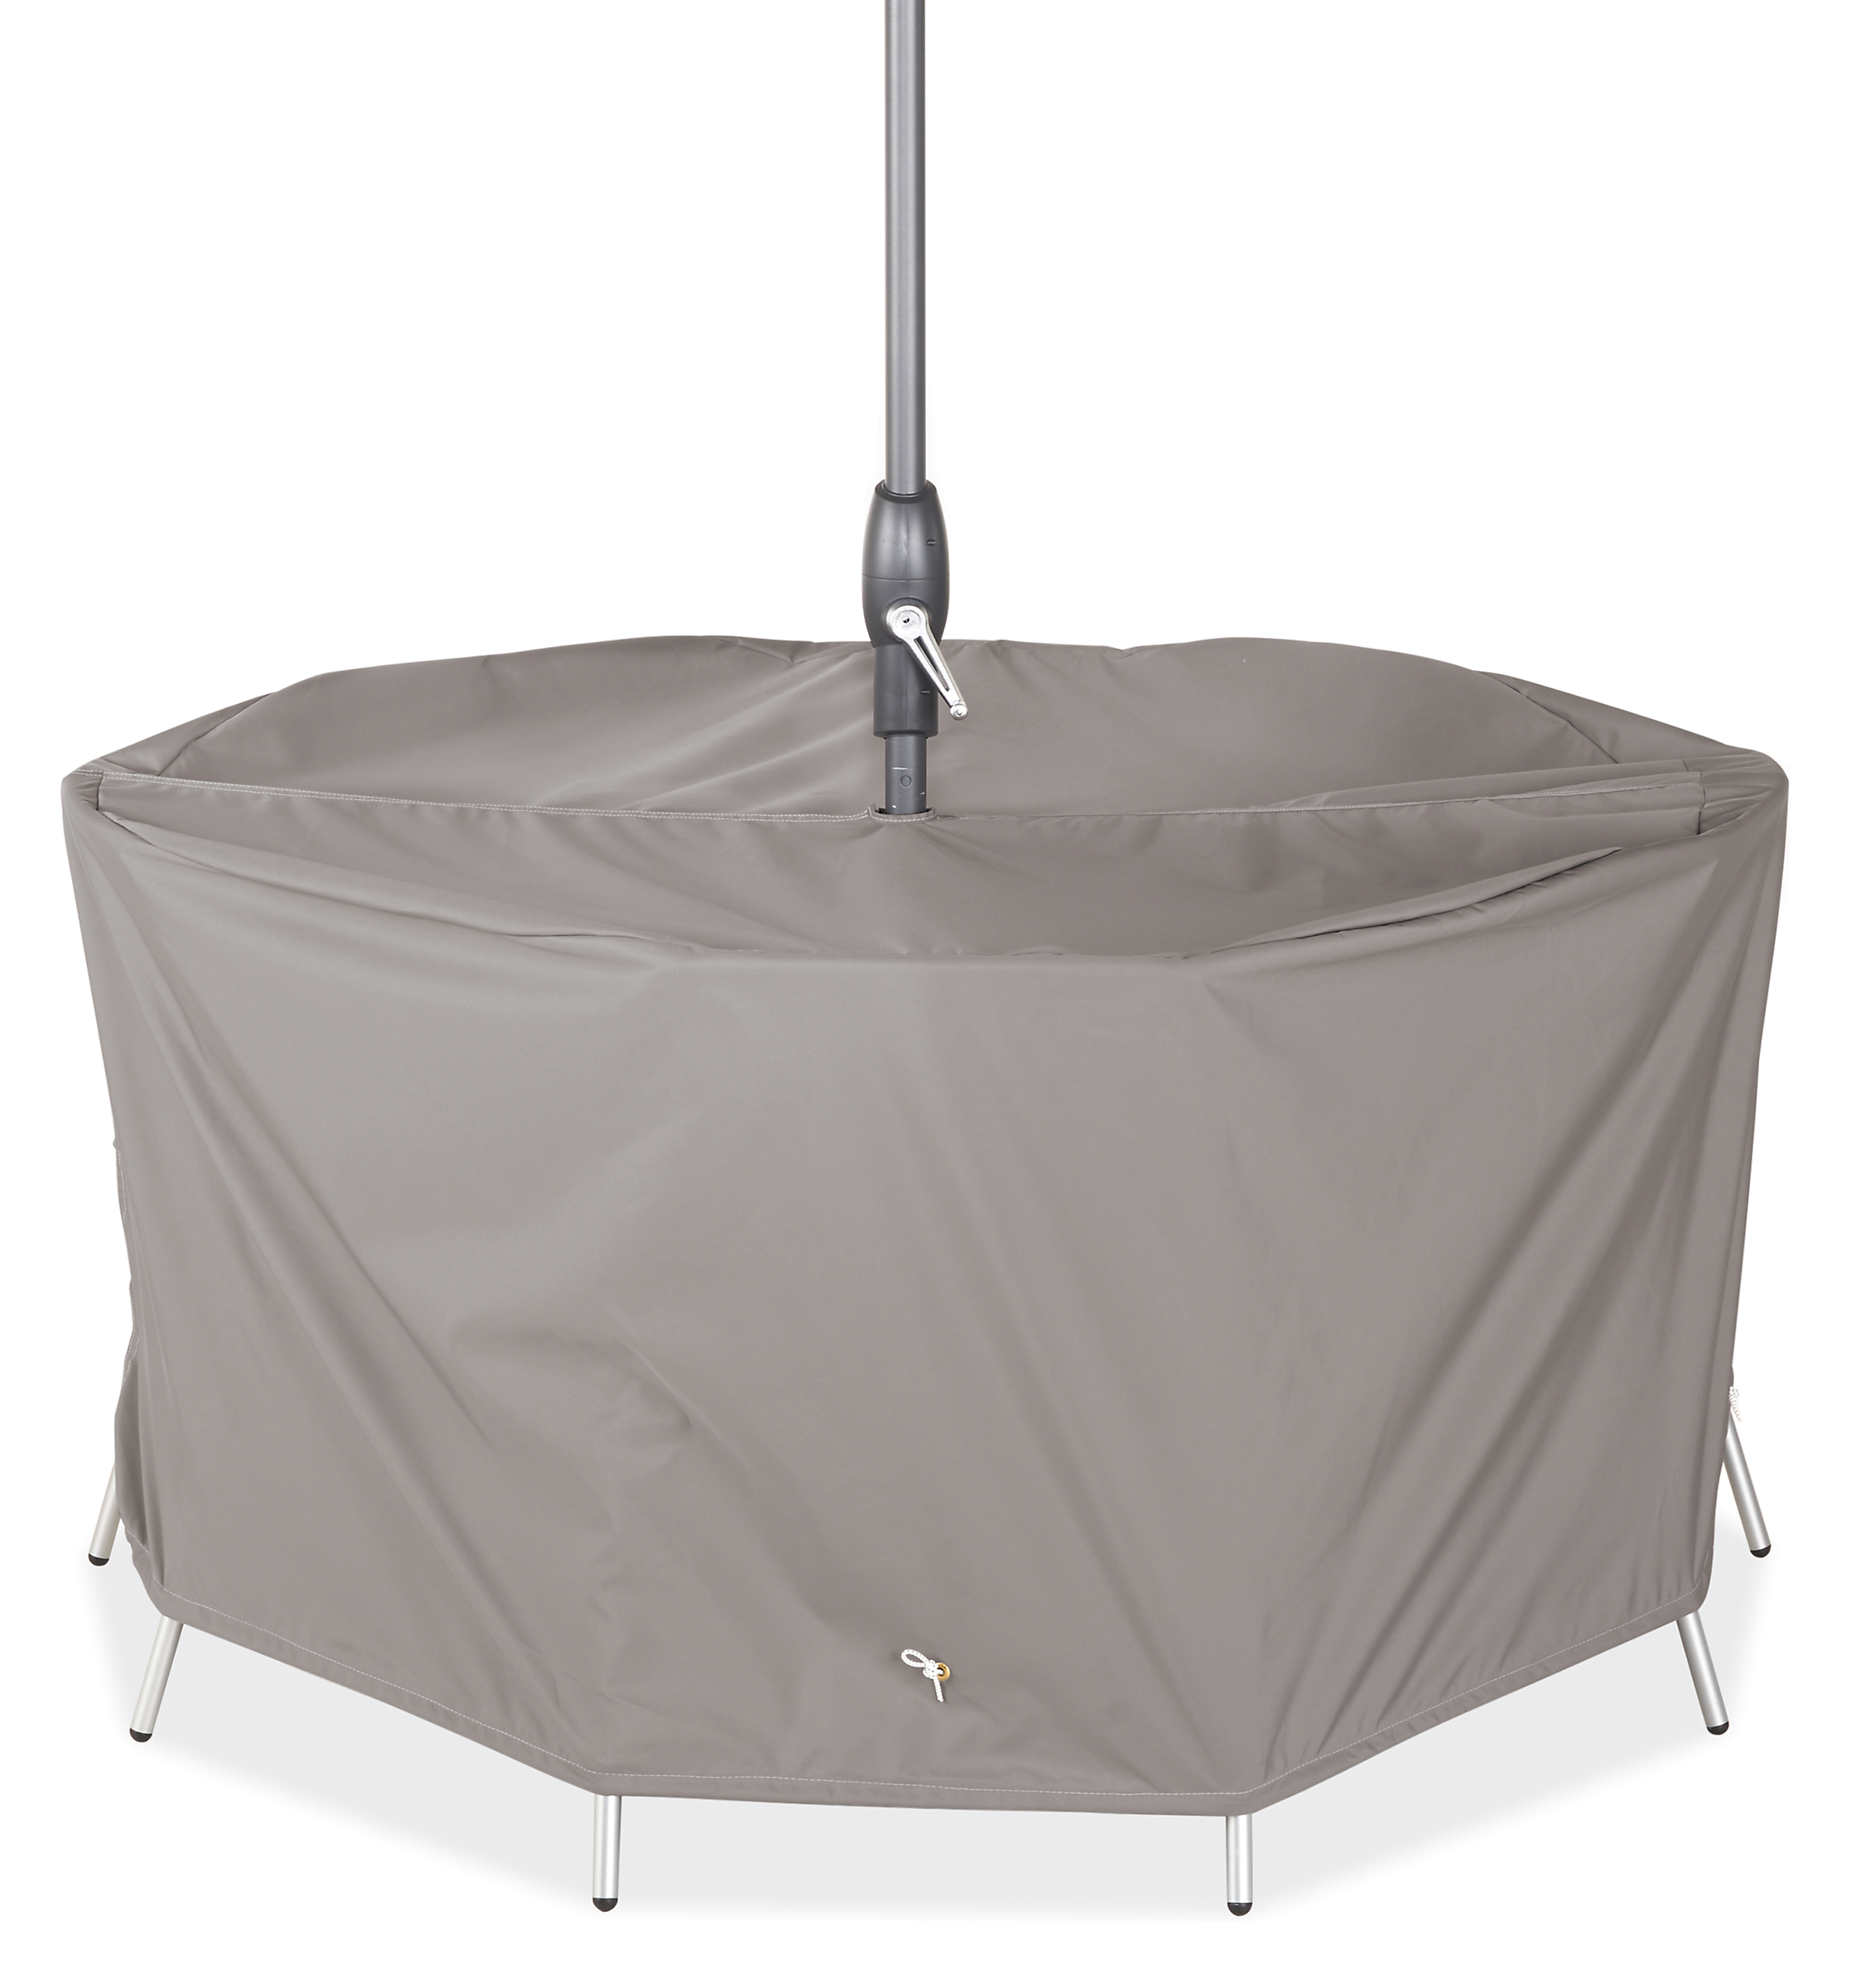 Outdoor Cover for Table/Chairs w/Umbrella Hole 60 diam 30h with Hooks